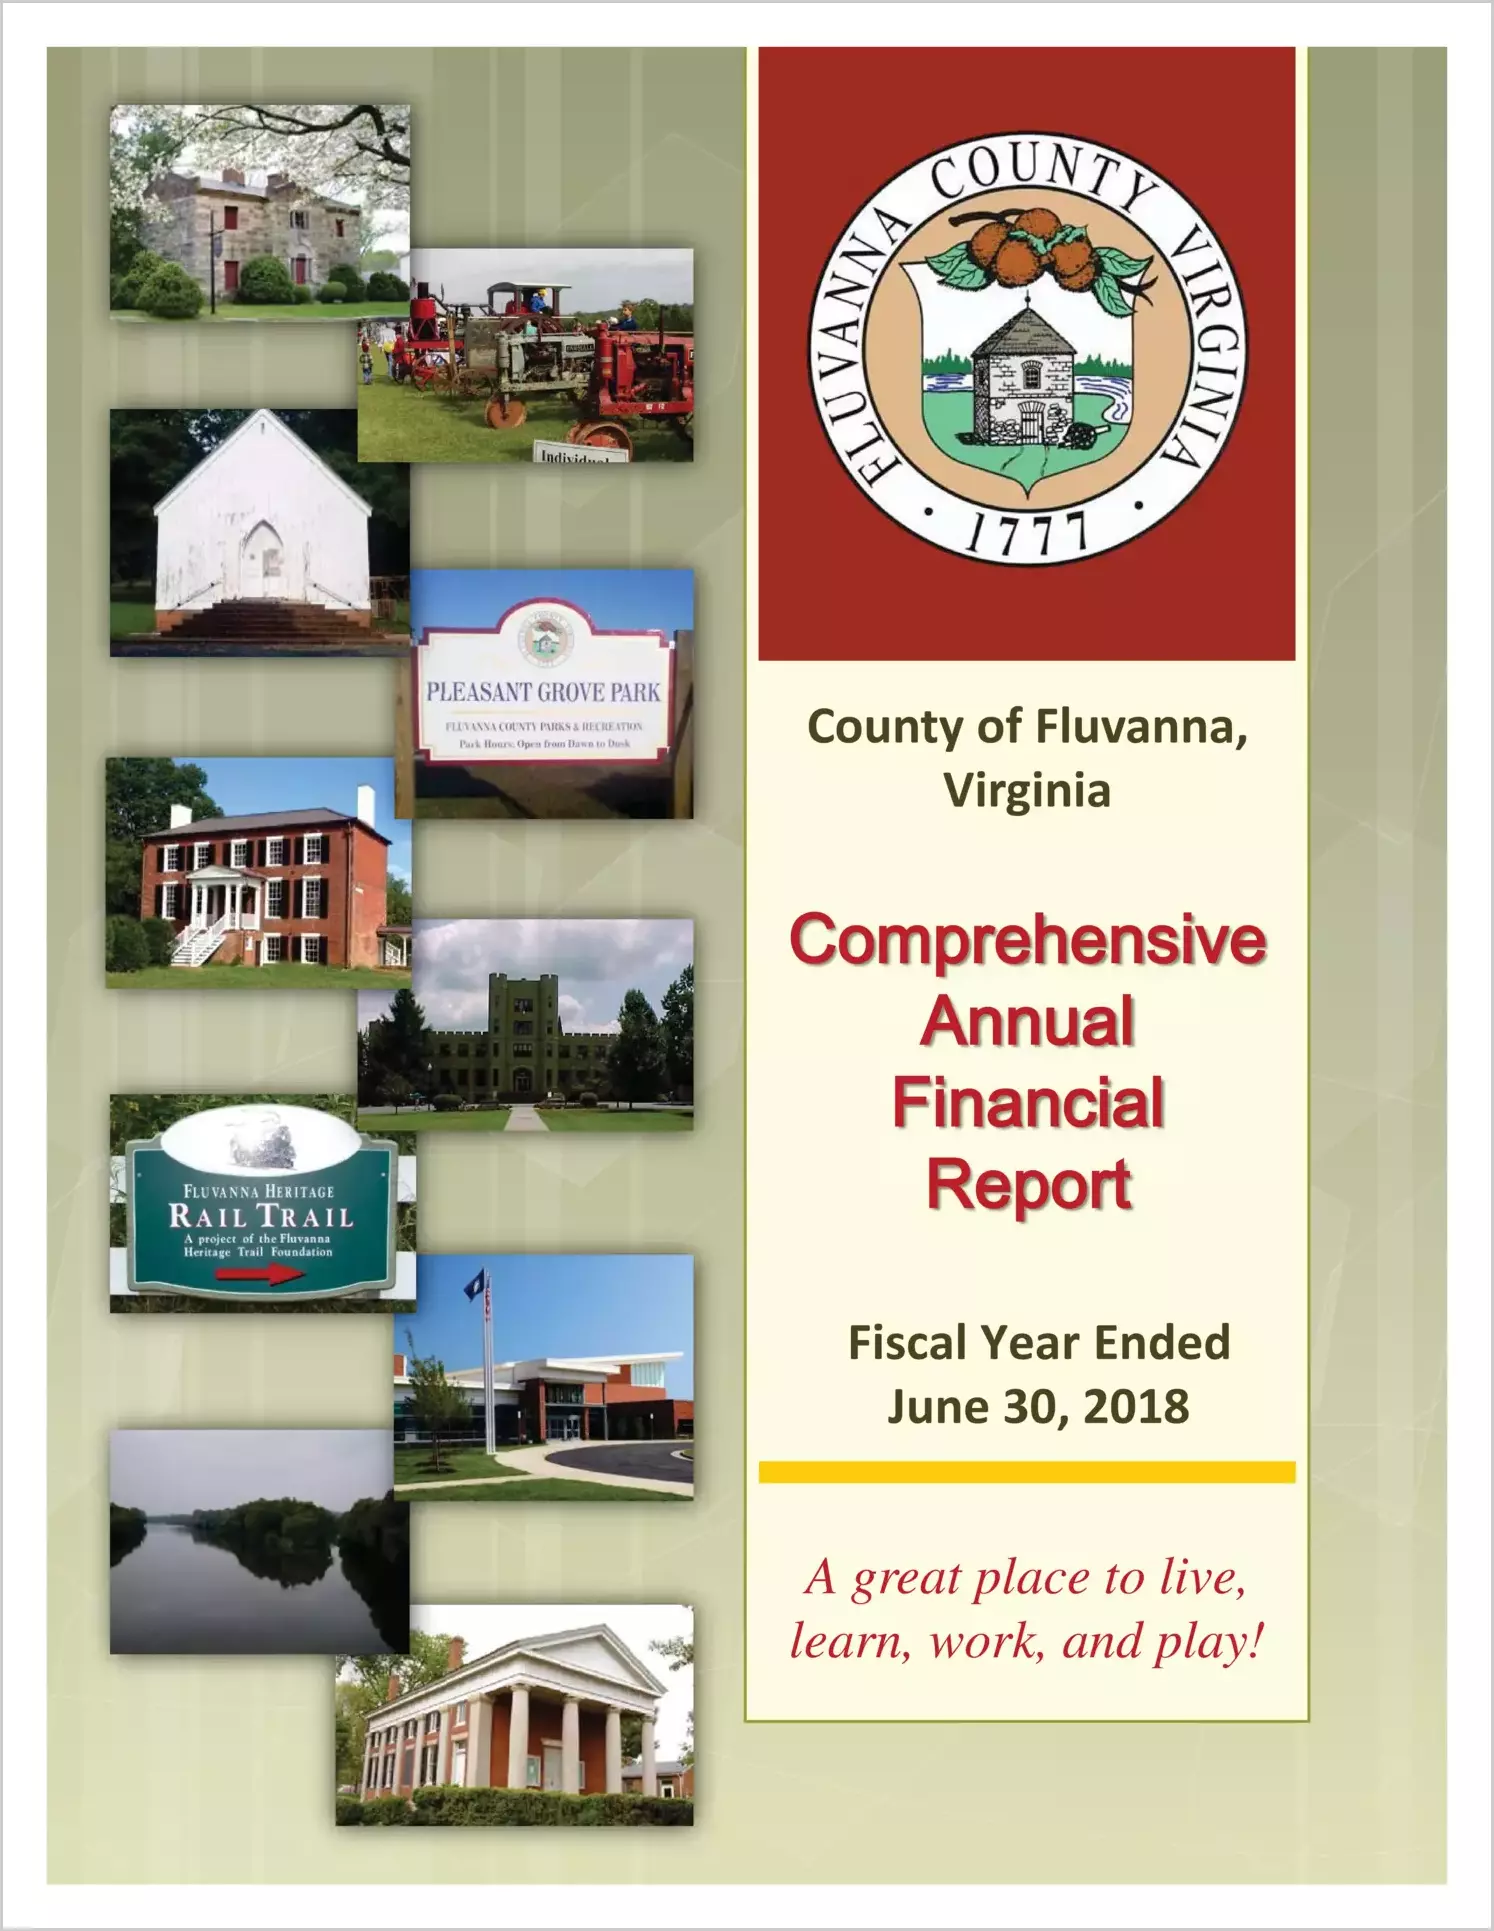 2018 Annual Financial Report for County of Fluvanna